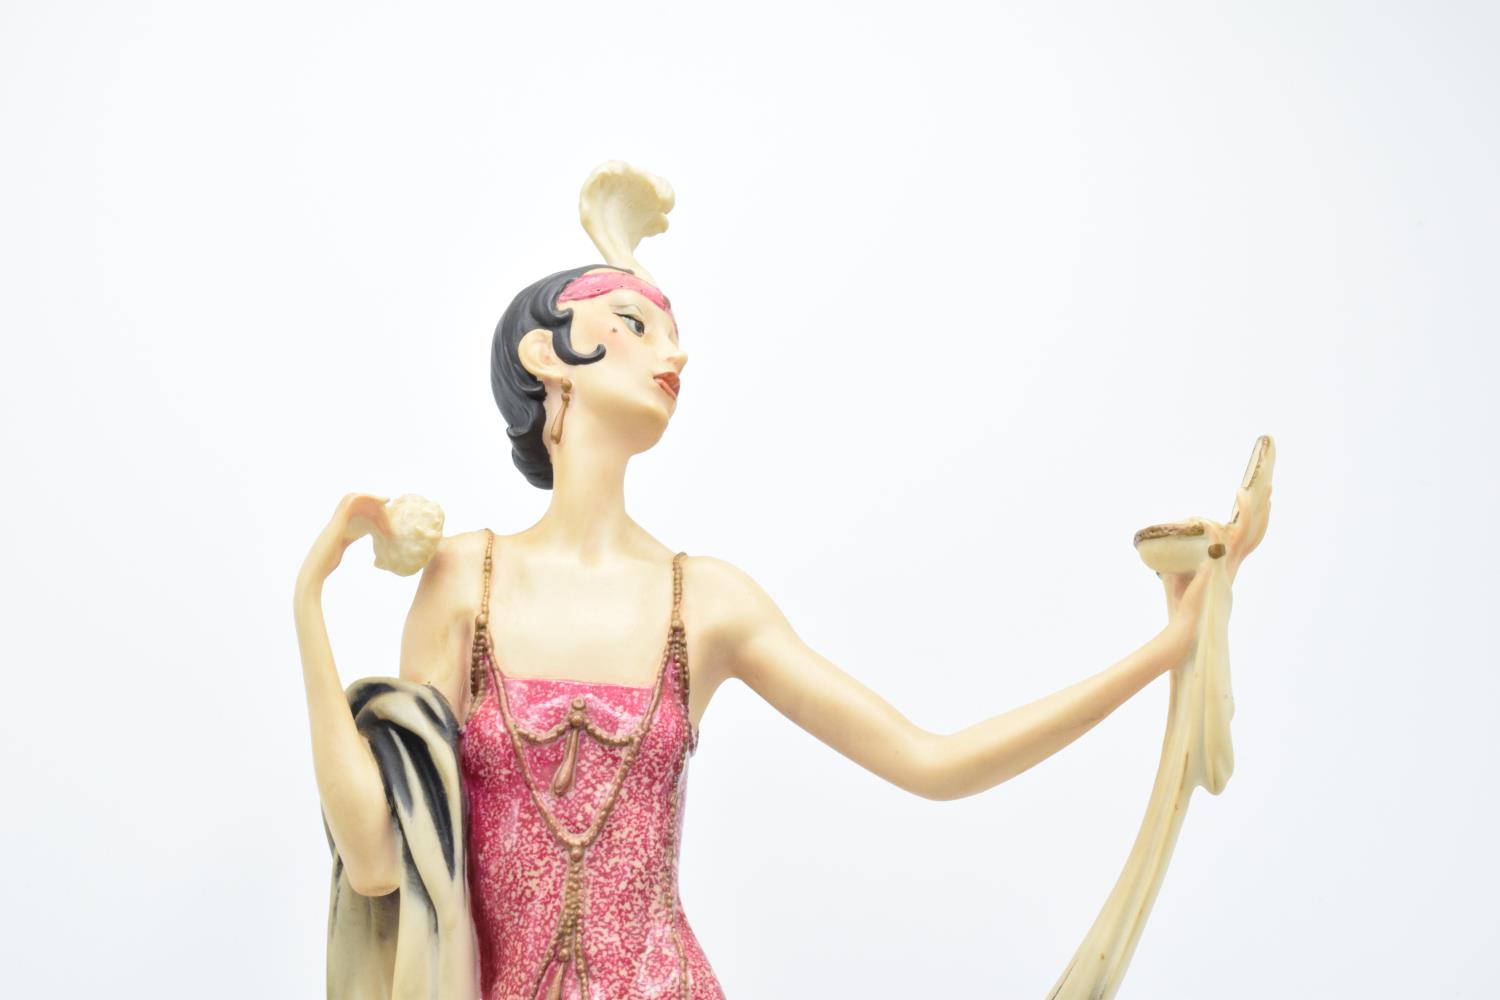 Giuseppe Armani Figurine "Lady with Compact" Mounted on Wooden Base, 1987 Limited Edition My Fair - Image 2 of 6